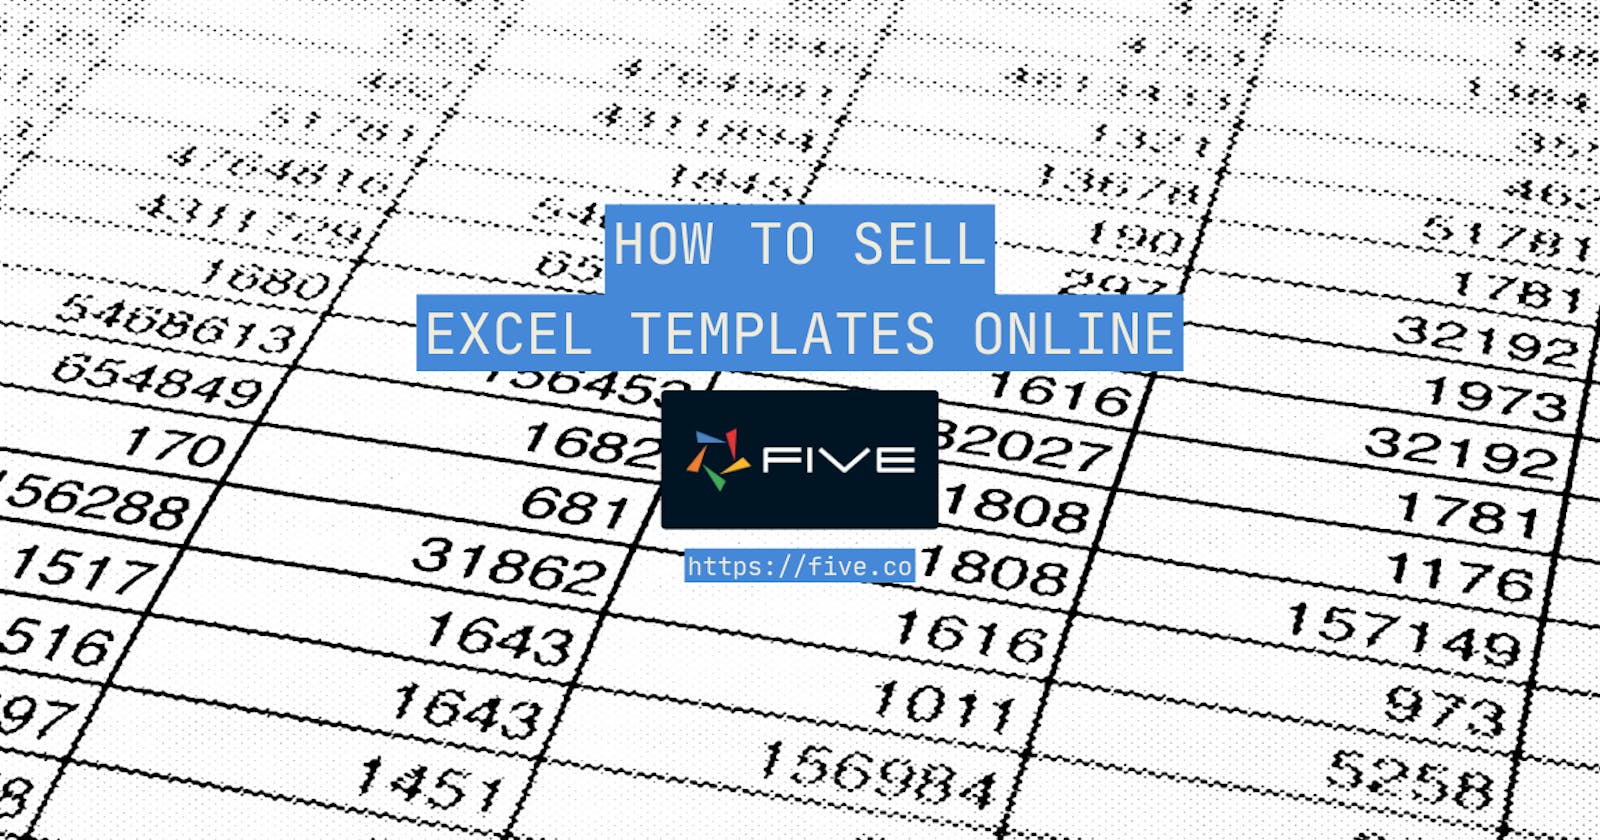 How to Sell Excel Templates Online